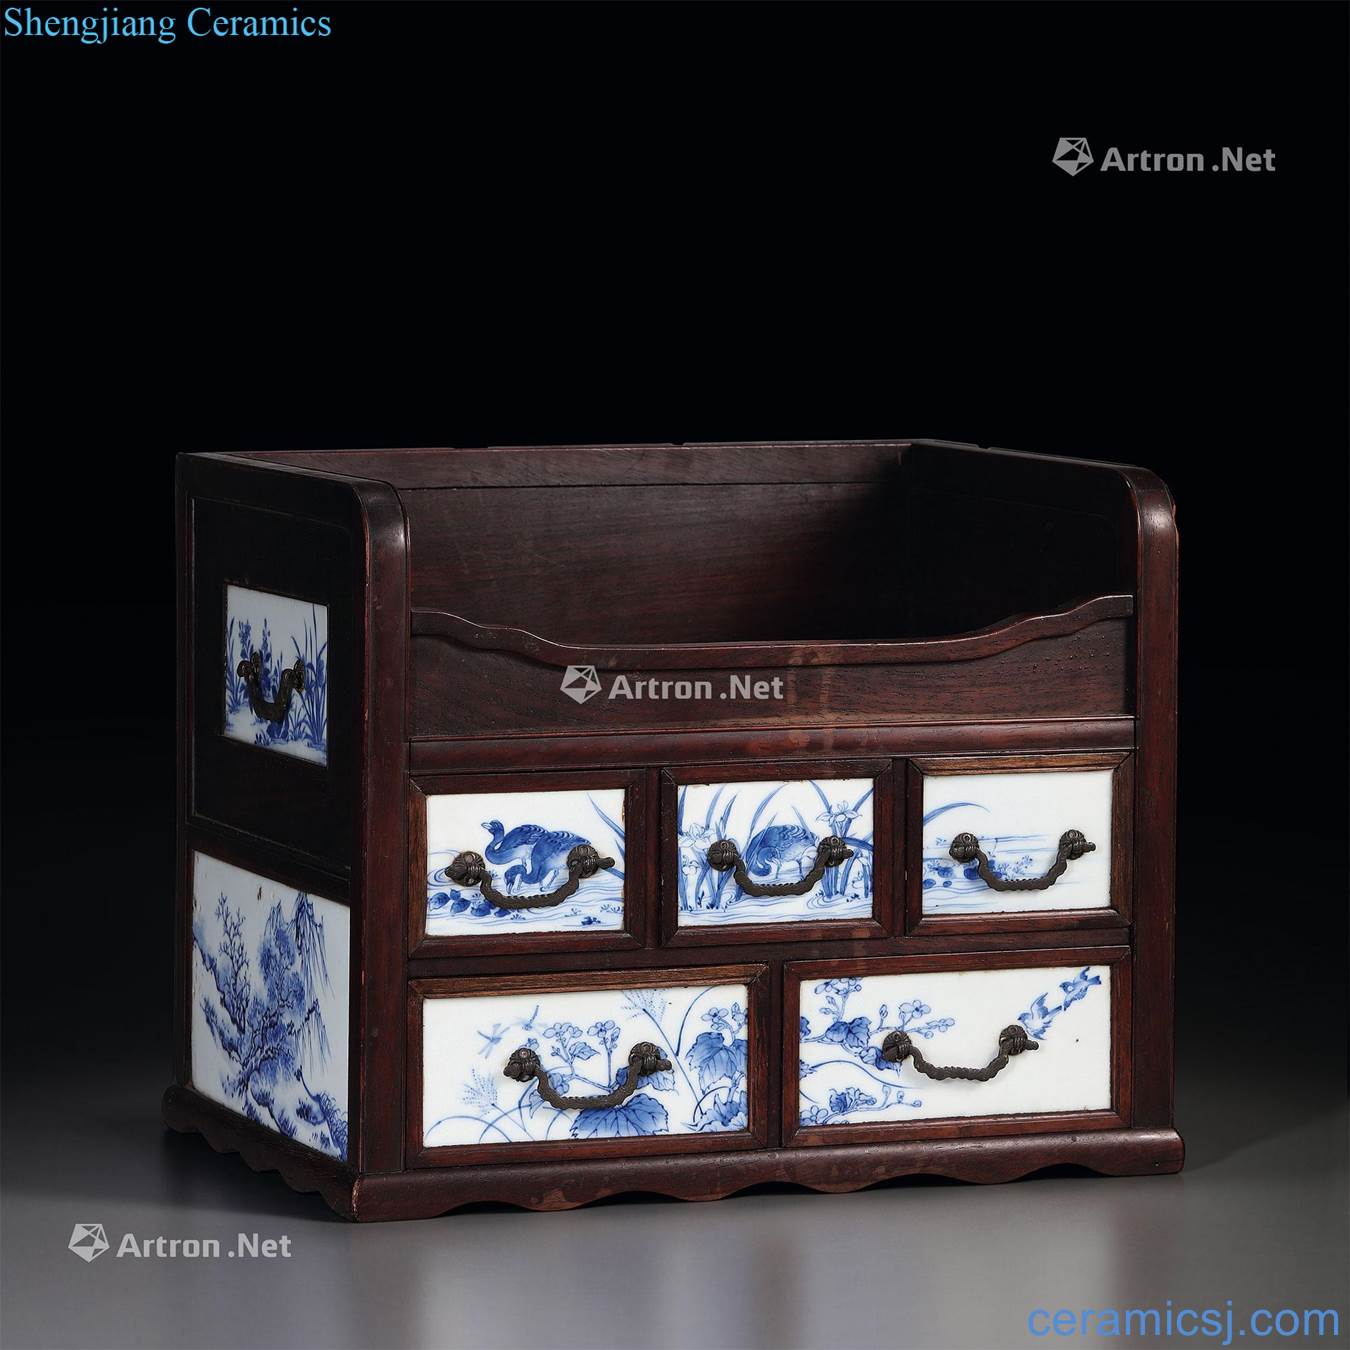 Castle in the early qing annatto embedded blue mountains and songbirds grain porcelain plate locker